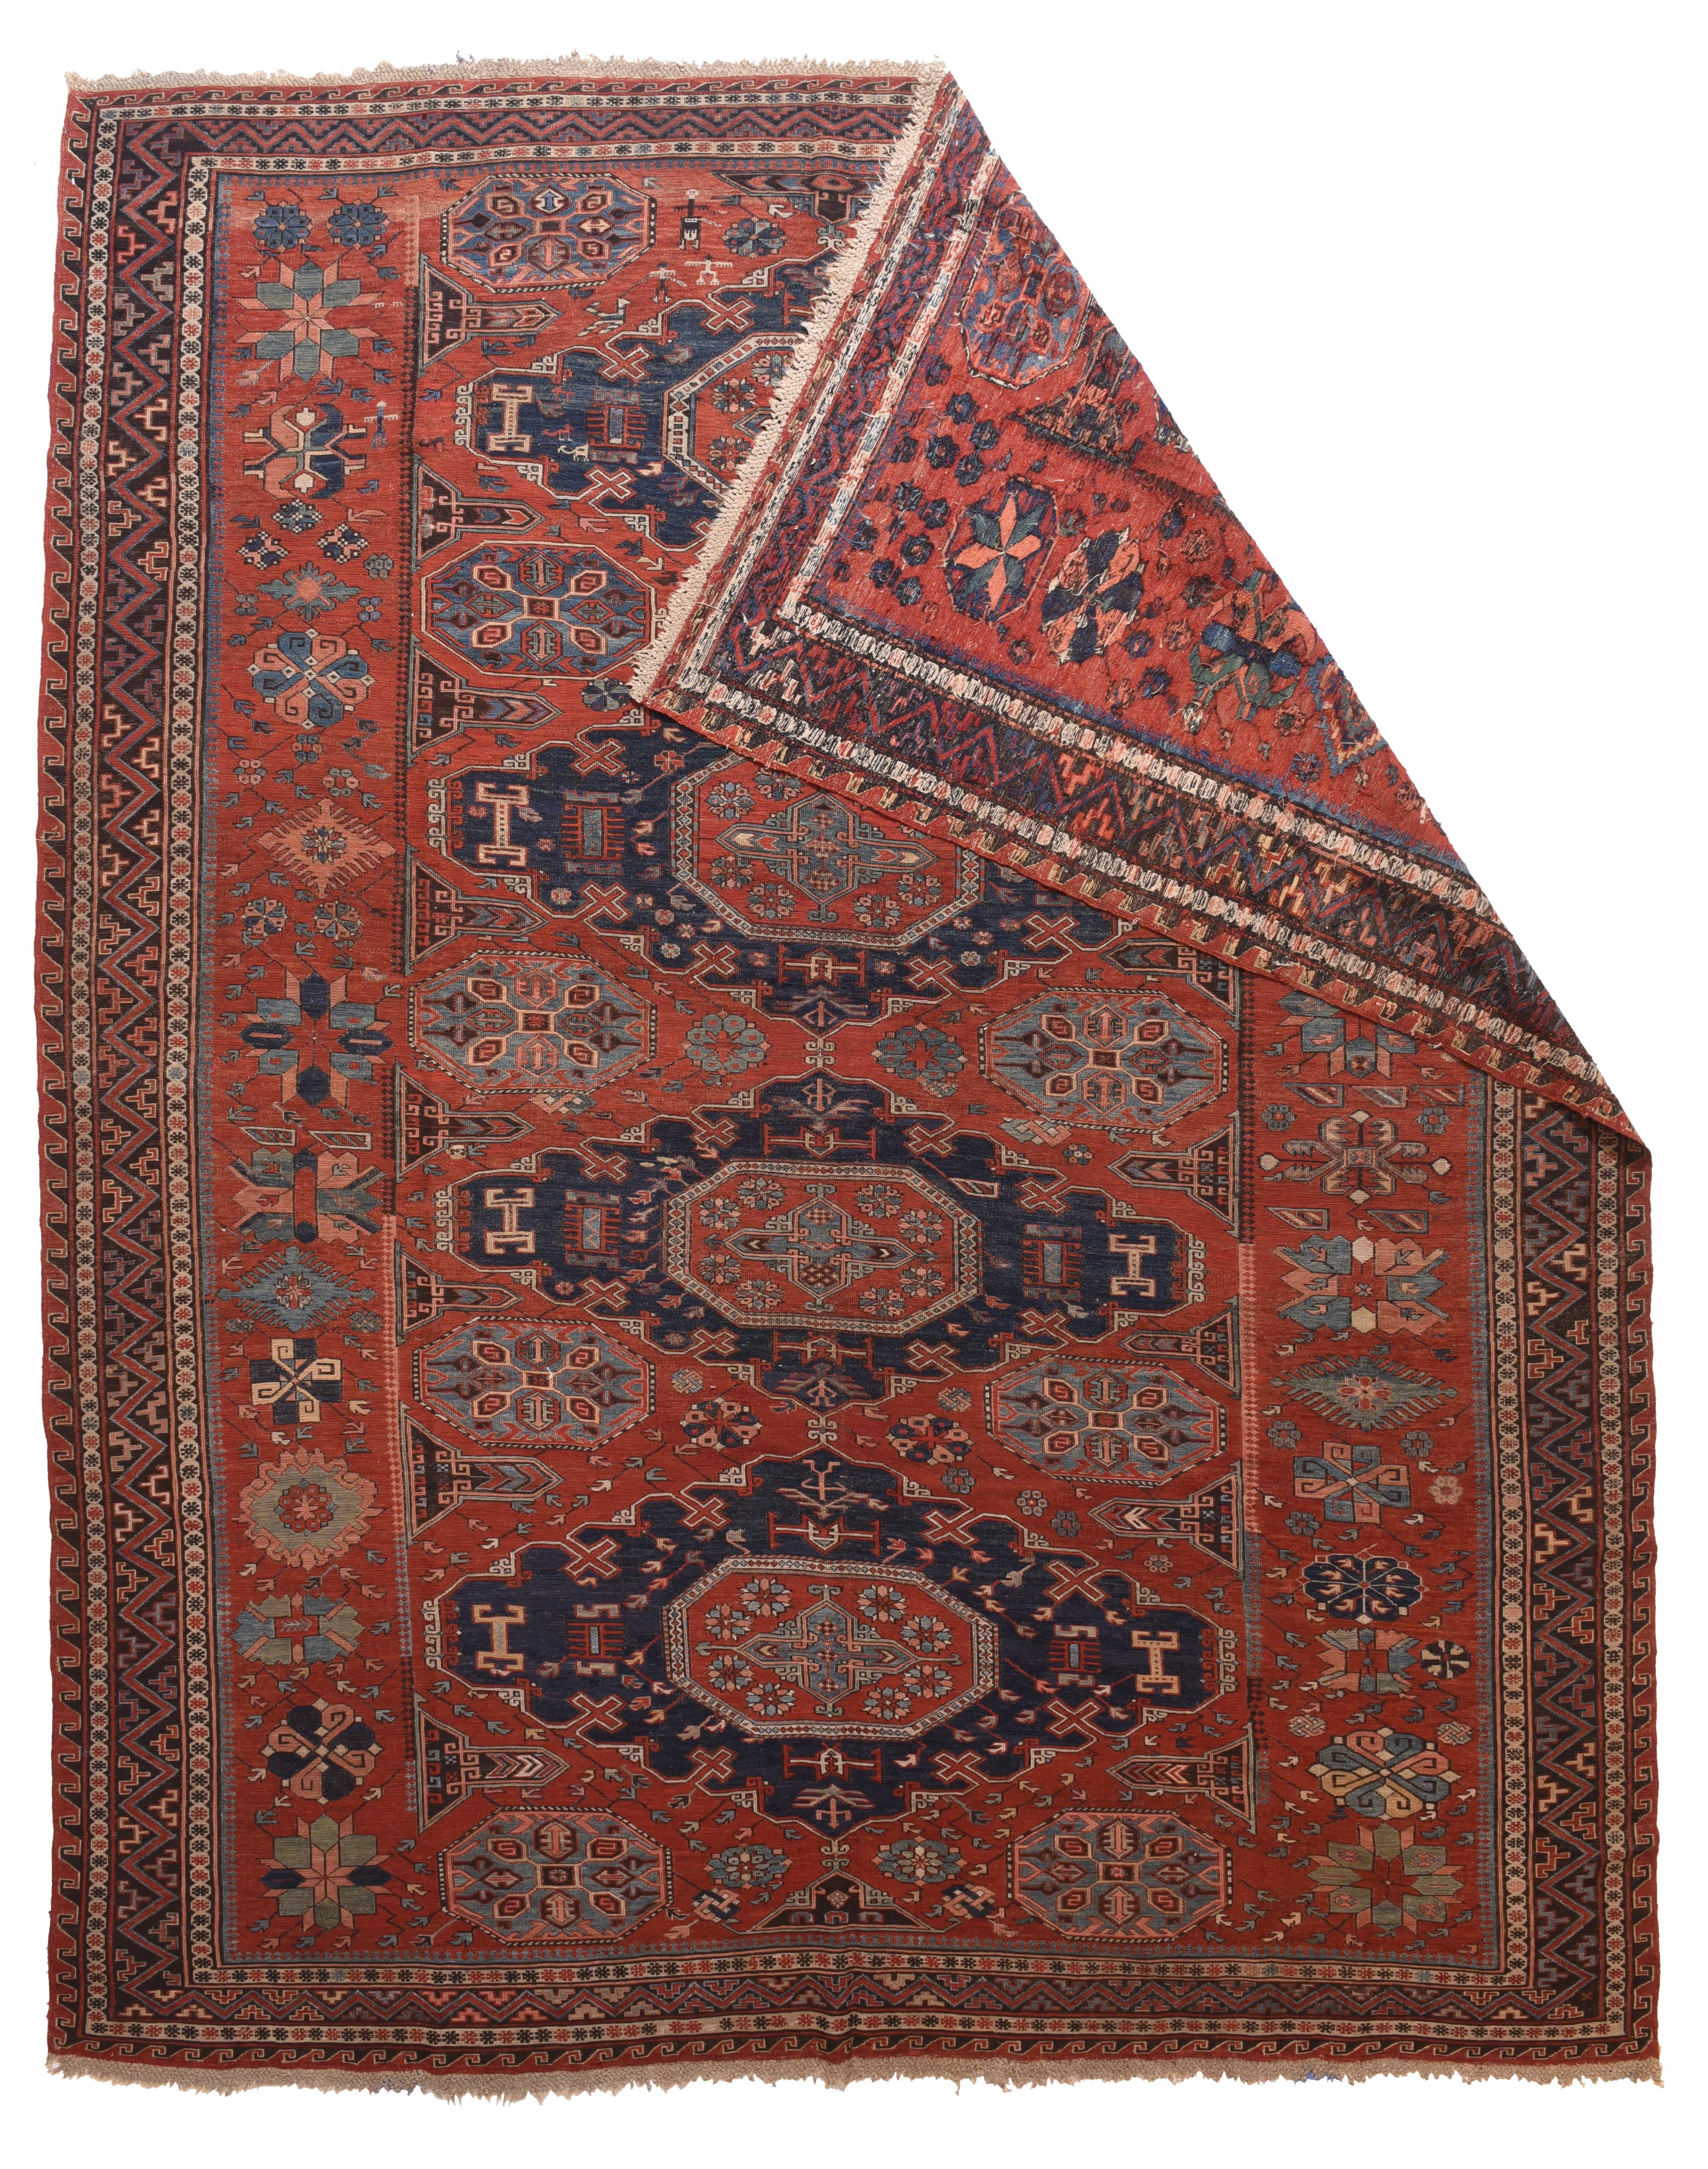 Soumak (also spelled Soumakh, Sumak, Sumac, or Soumac) is a tapestry technique of weaving strong and decorative textiles used as rugs and domestic bags. Baks used for bedding are known as Soumak Mafrash. Sumak is a type of flat-weave, somewhat